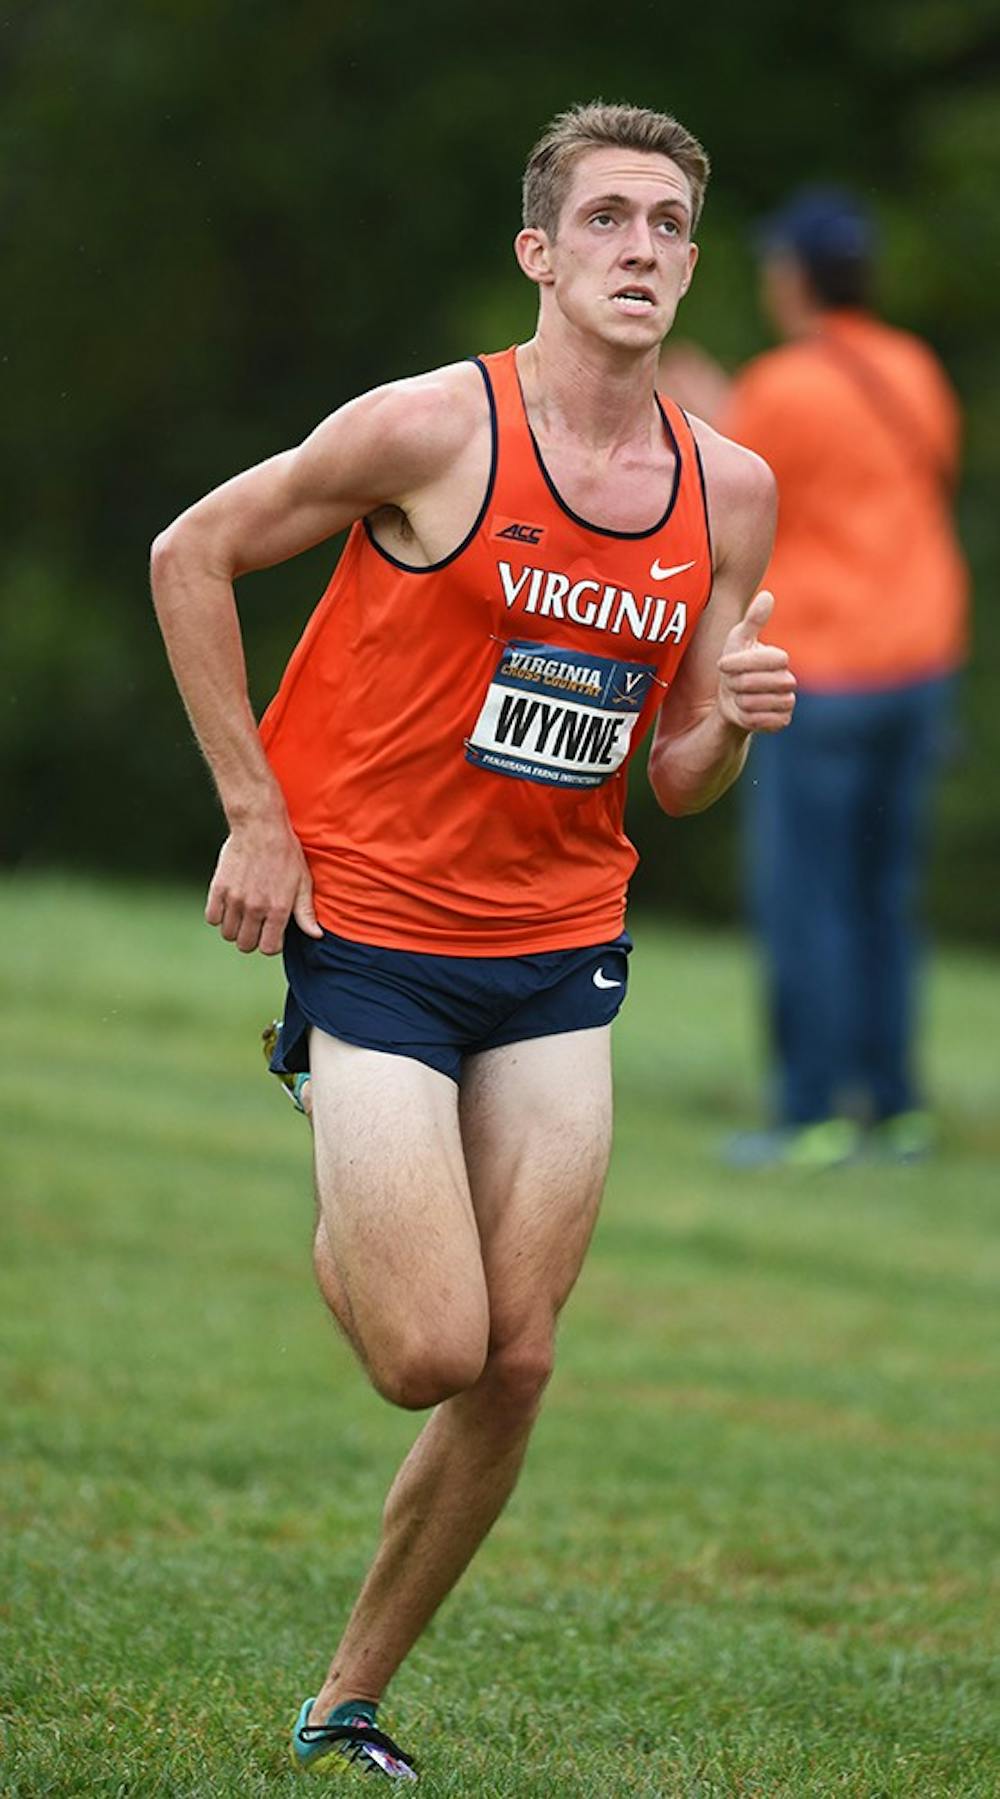 <p>Junior Henry Wynne's two first-place results contributed to the Virginia men's third-place finish at the ACC Indoor Championships. Wynne ran one leg of the distance medley relay that broke the ACC Championship record, and he also triumphed in the mile.&nbsp;</p>